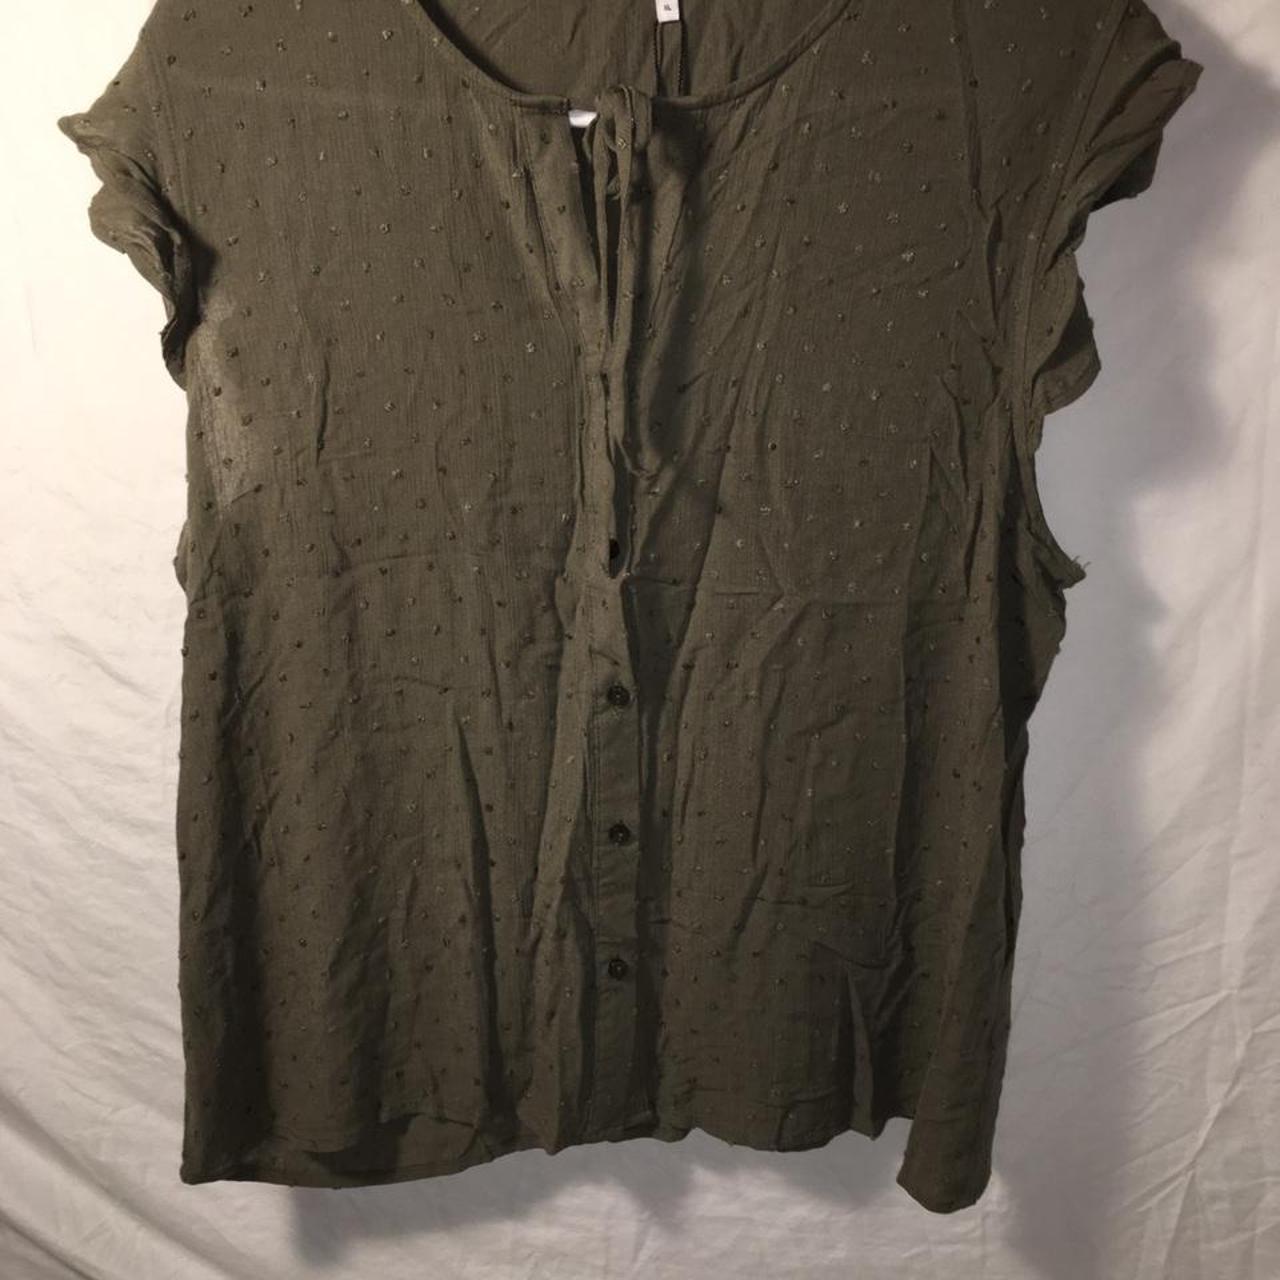 Product Image 1 - Olive green button down blouse